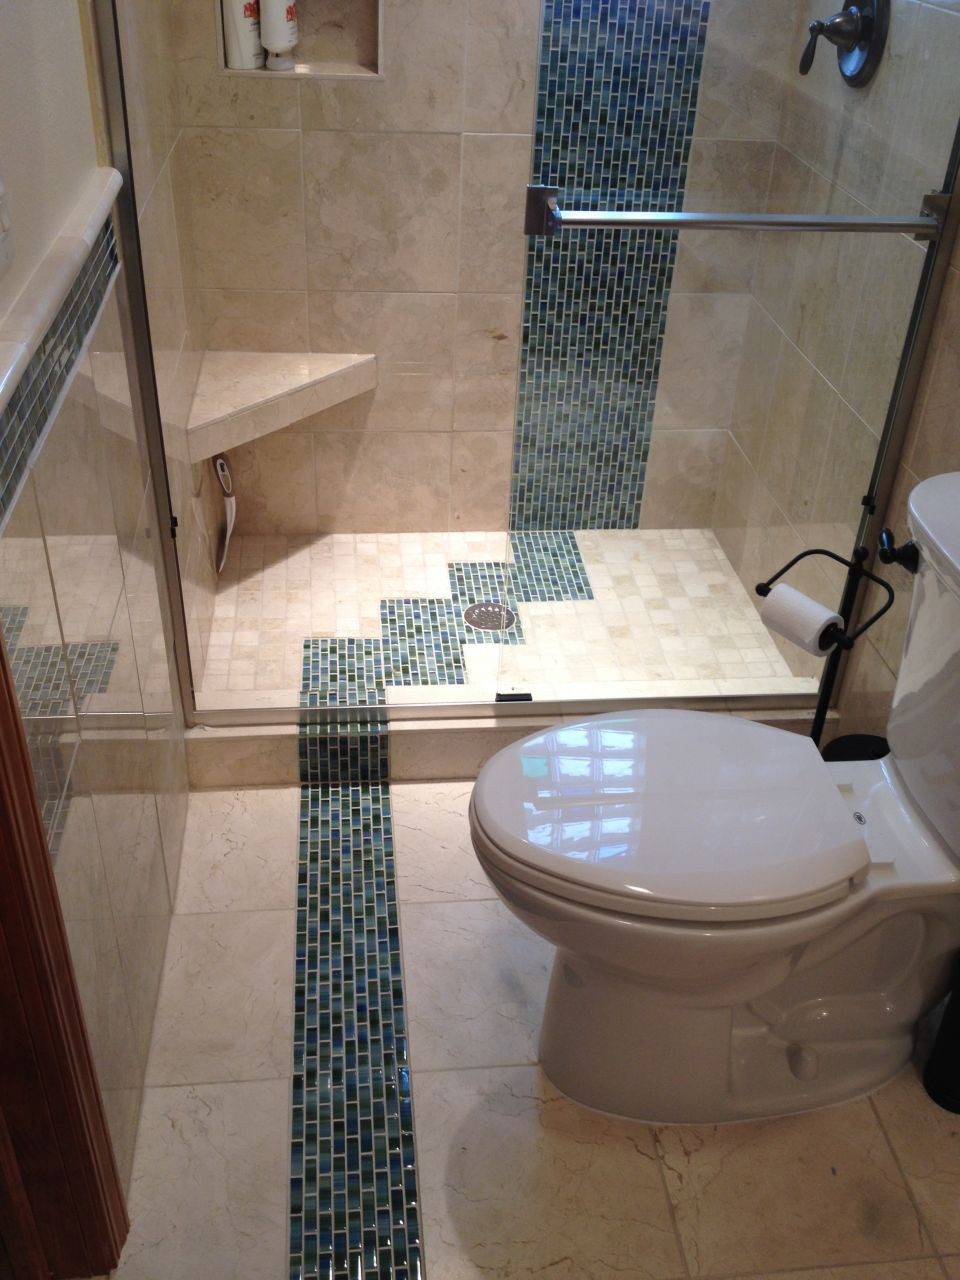 Glass Tile Bathroom Floor
 5’ x 8’ Luxury Bathroom Remodeling Frosted & Colored Glass